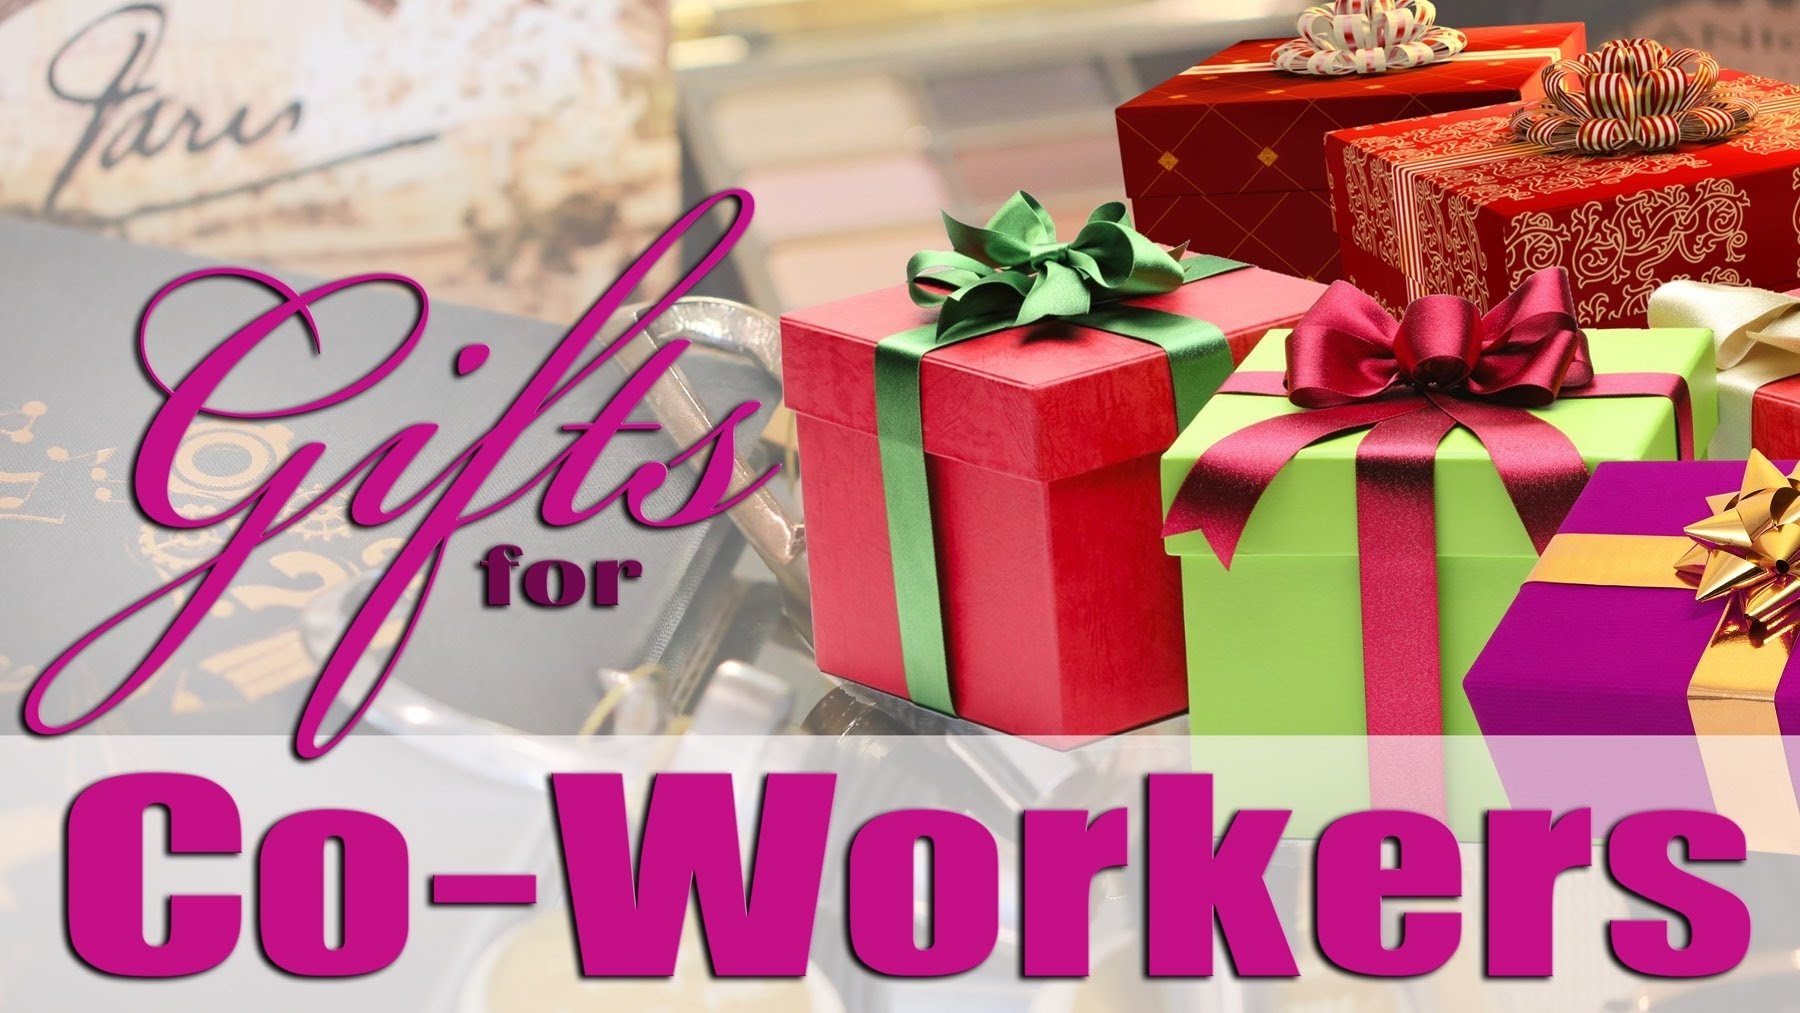 10 Lovable Holiday Gift Ideas For Coworkers gifts ideas for coworkers under 20 youtube 6 2022